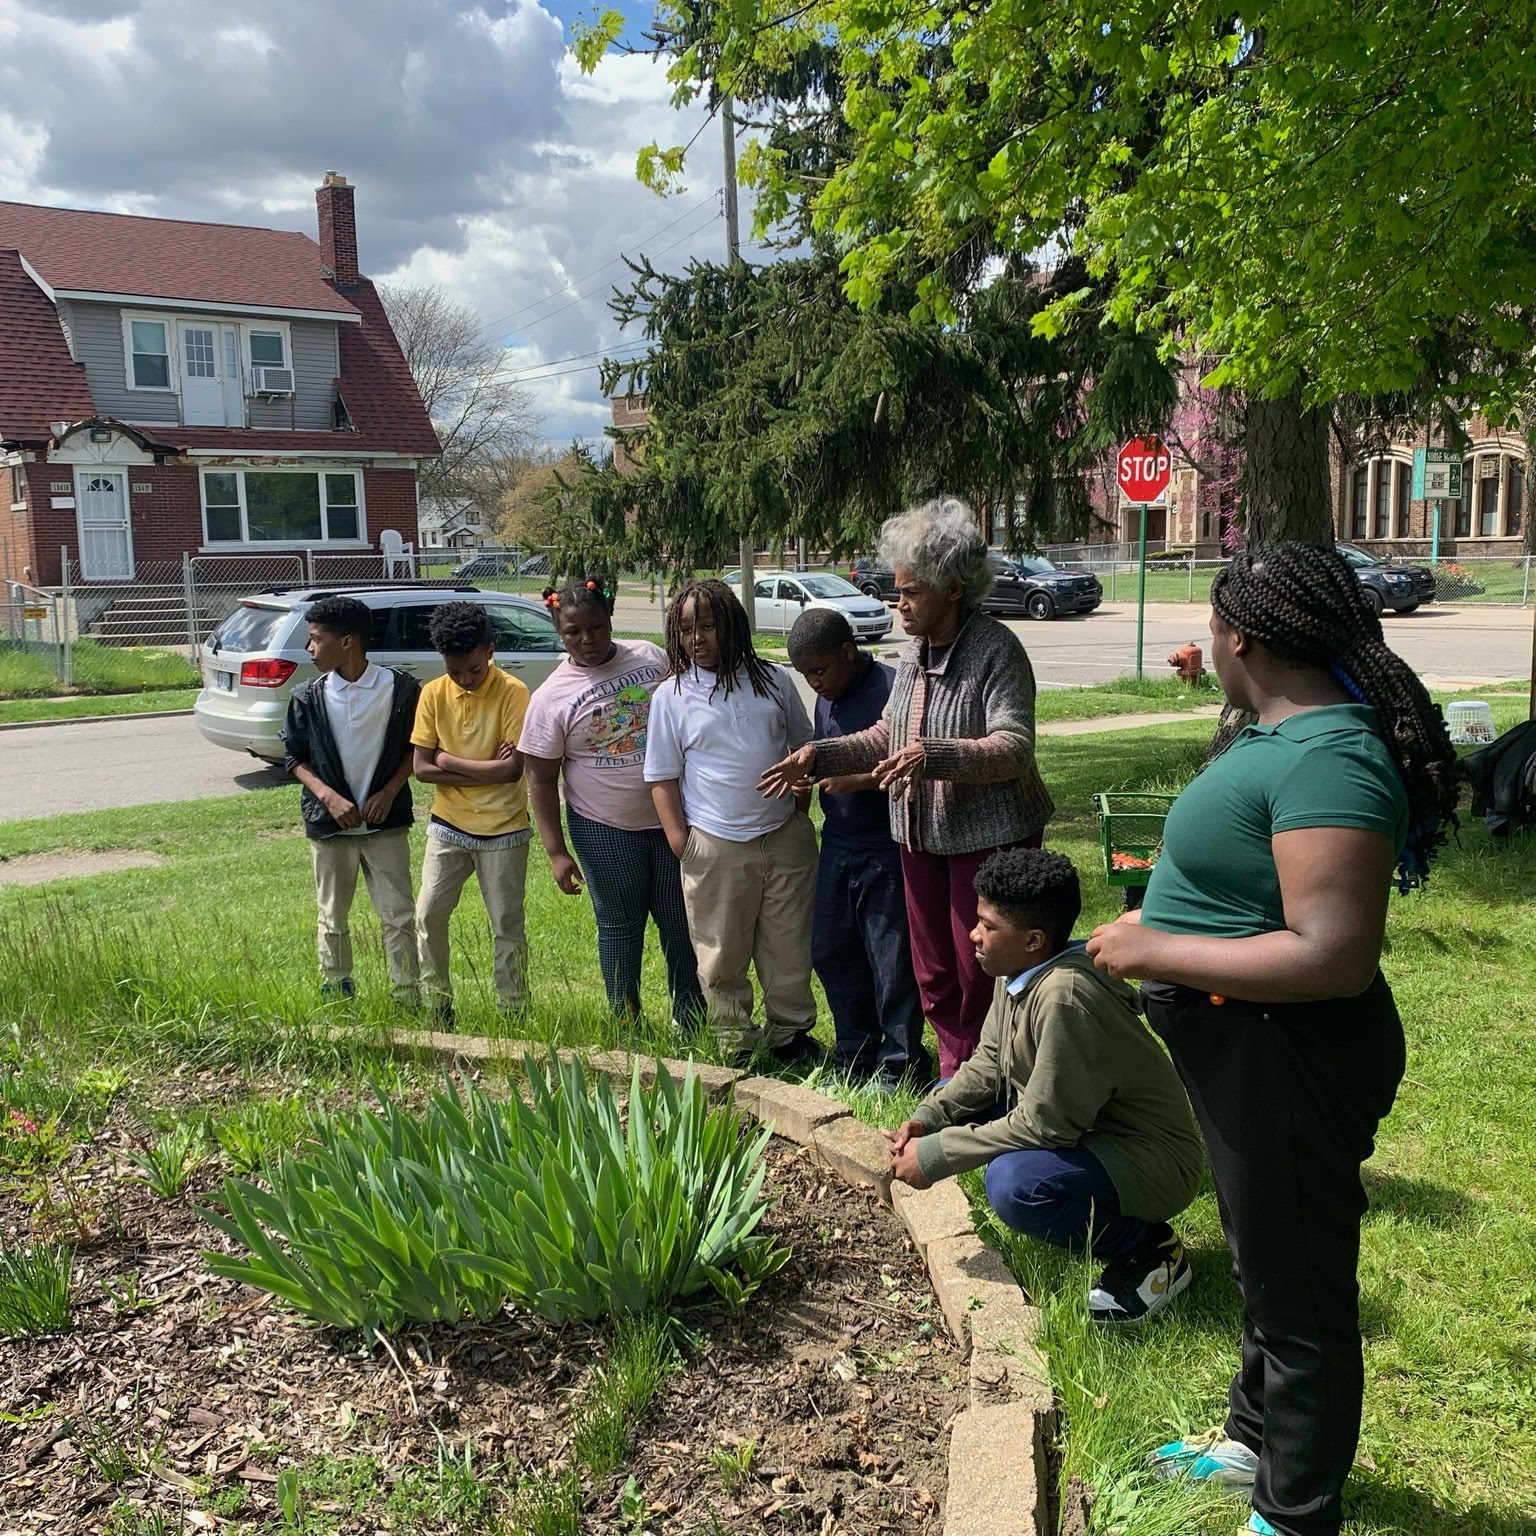 Young people gather around a garden in a neighborhood with an educator.